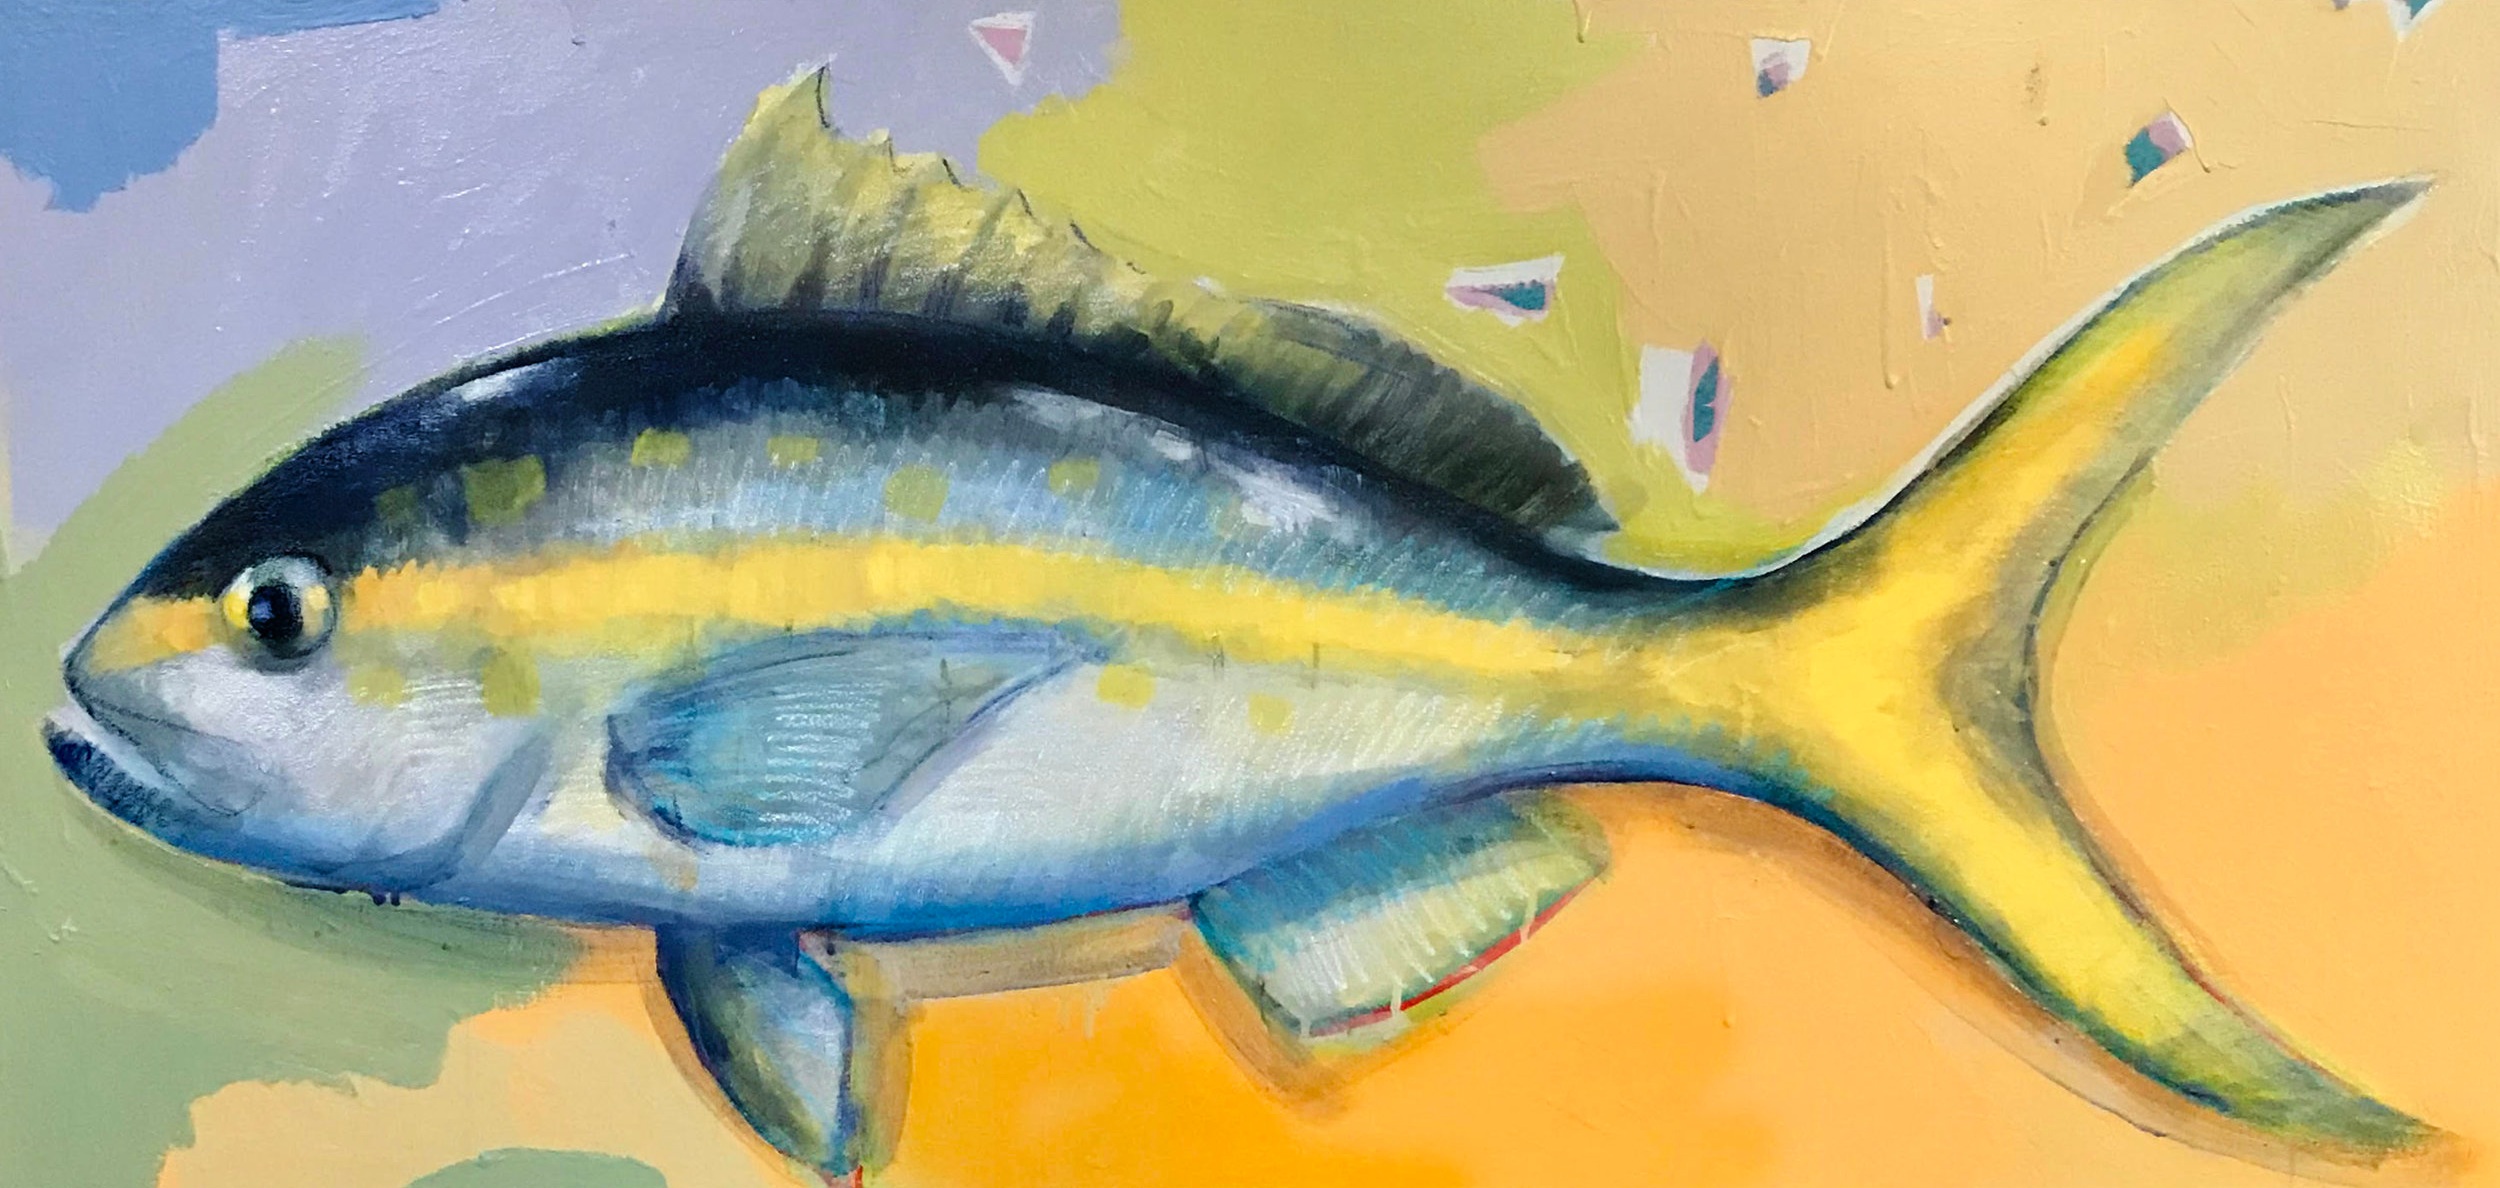 TIM JAEGER, YELLOW TAIL SNAPPER, 2018